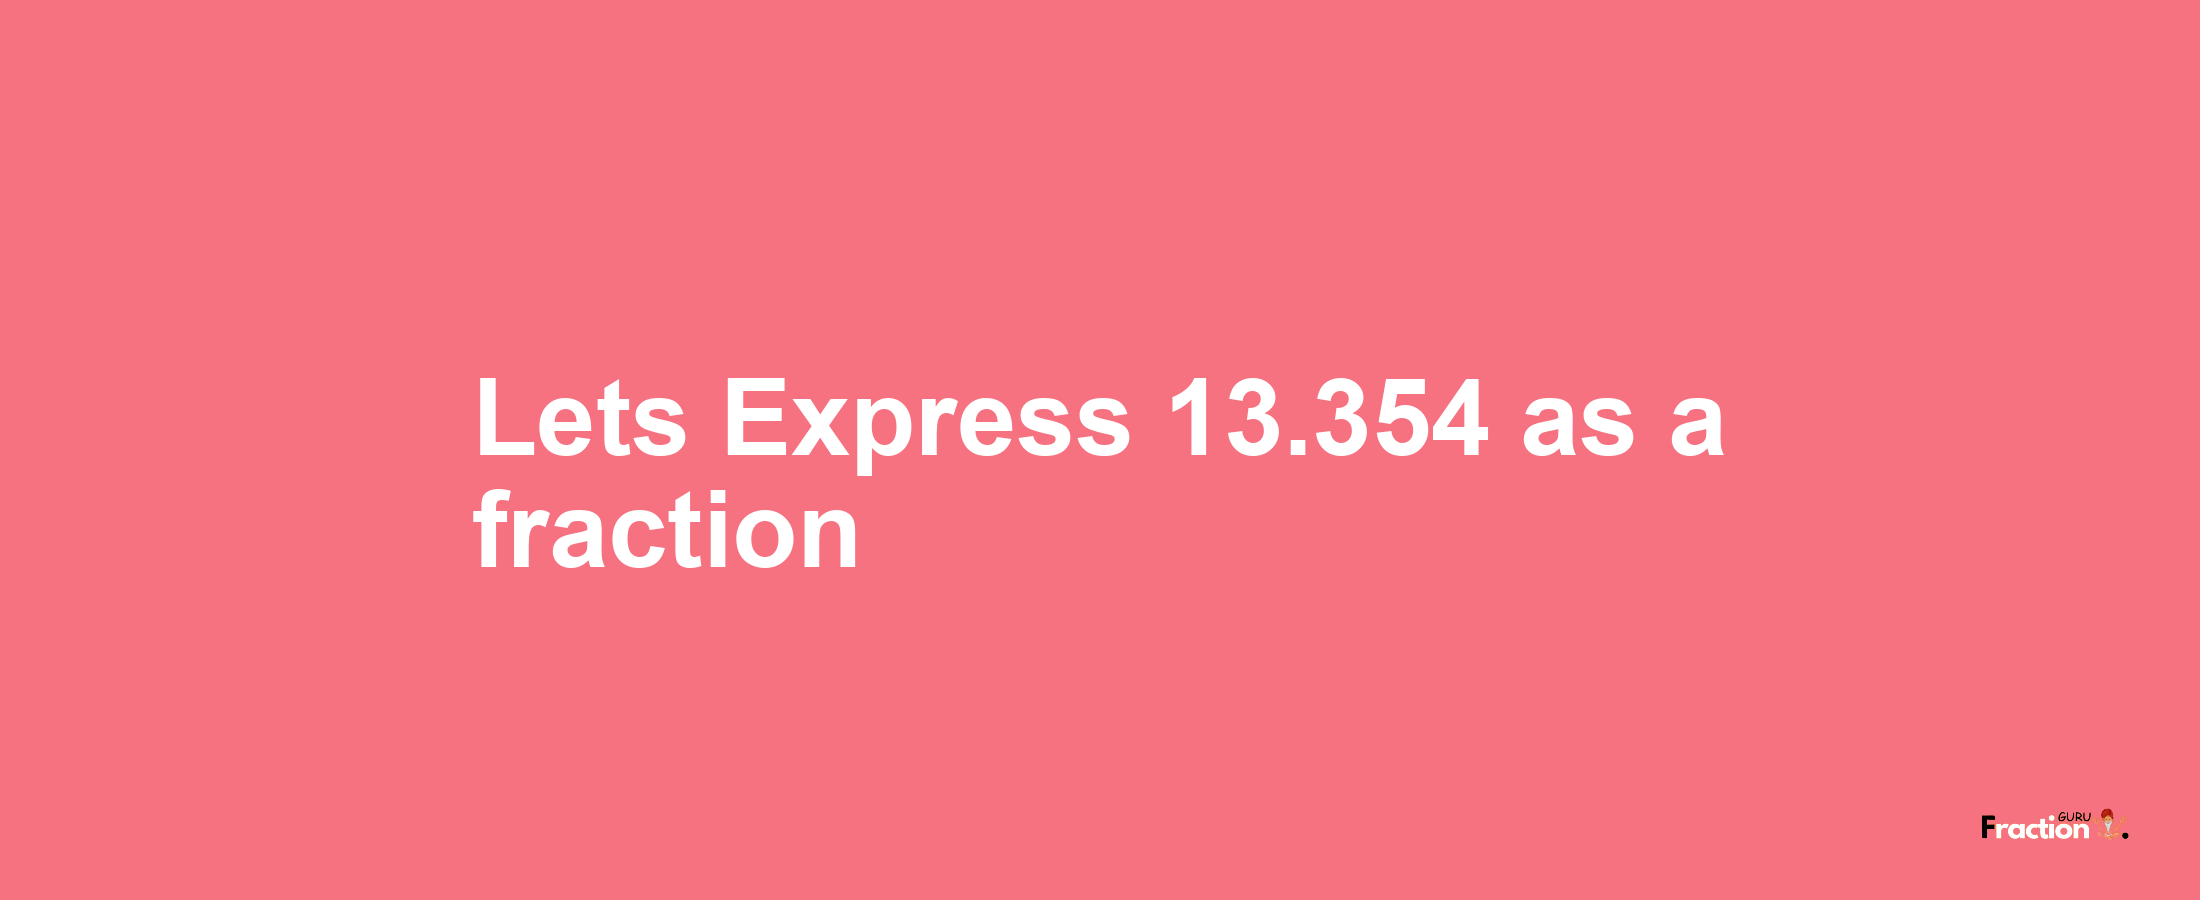 Lets Express 13.354 as afraction